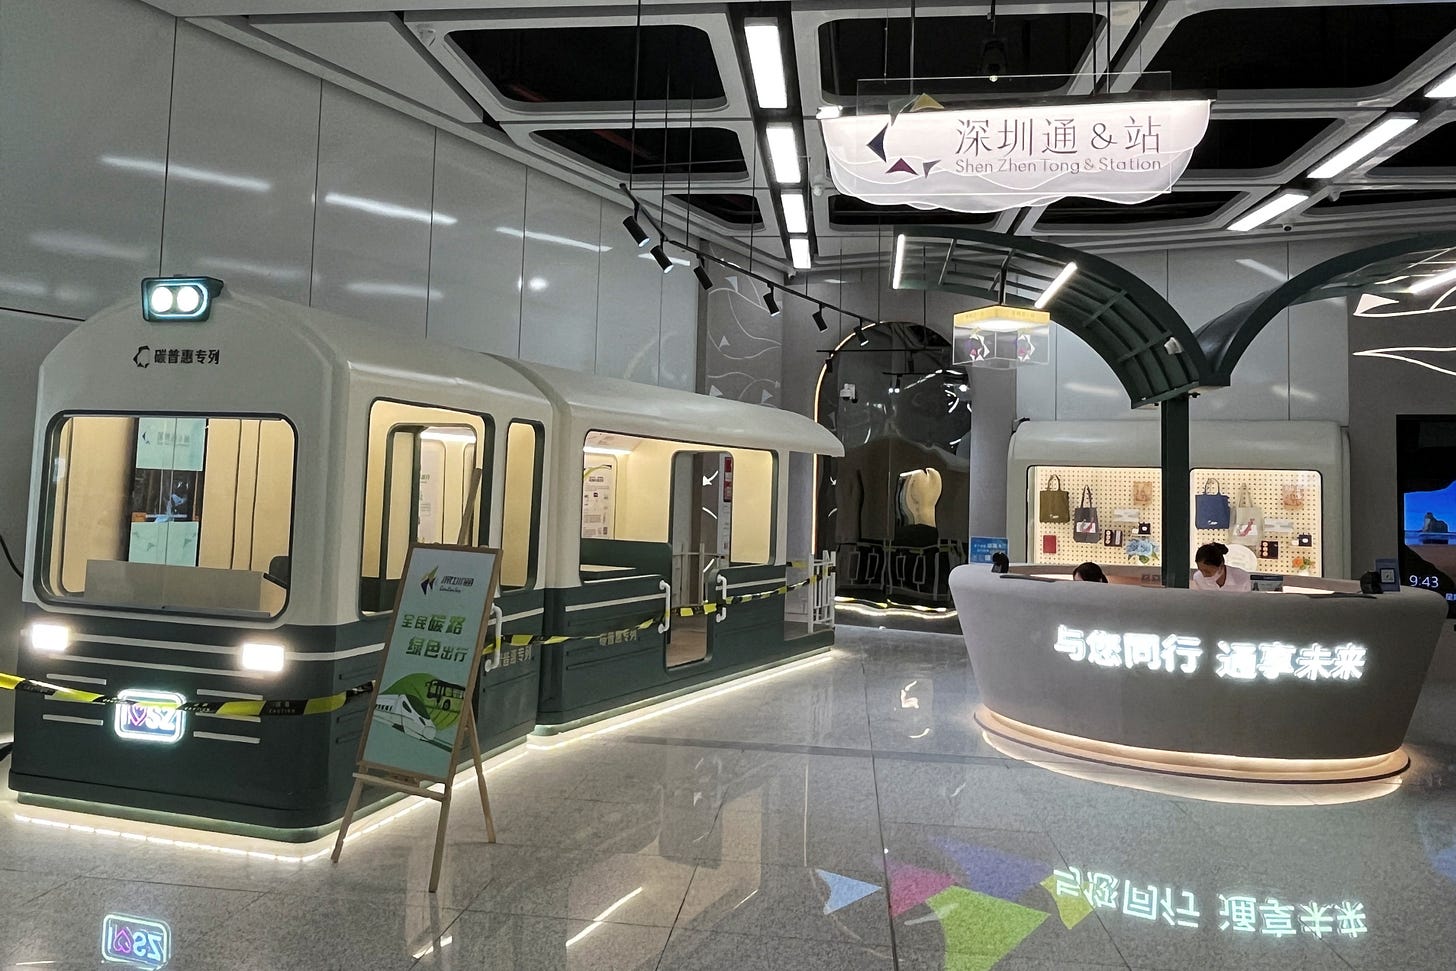 Exhibition for Shenzhen's metro carbon inclusion scheme inside a subway station